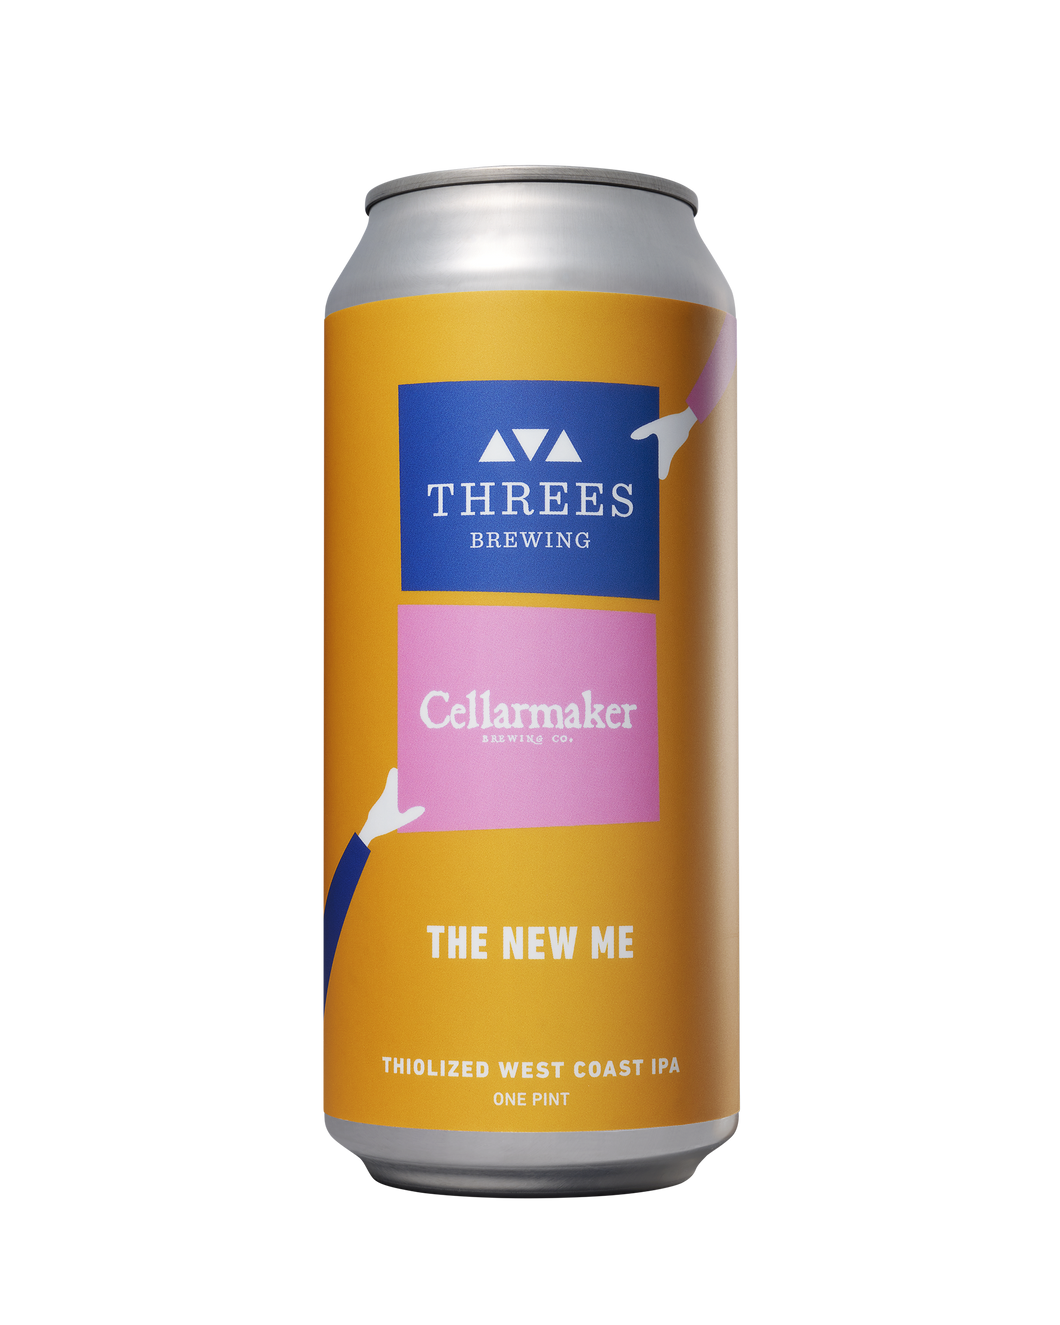 The New Me (Collaboration with Cellarmaker Brewing / Thiolized West Coast IPA)